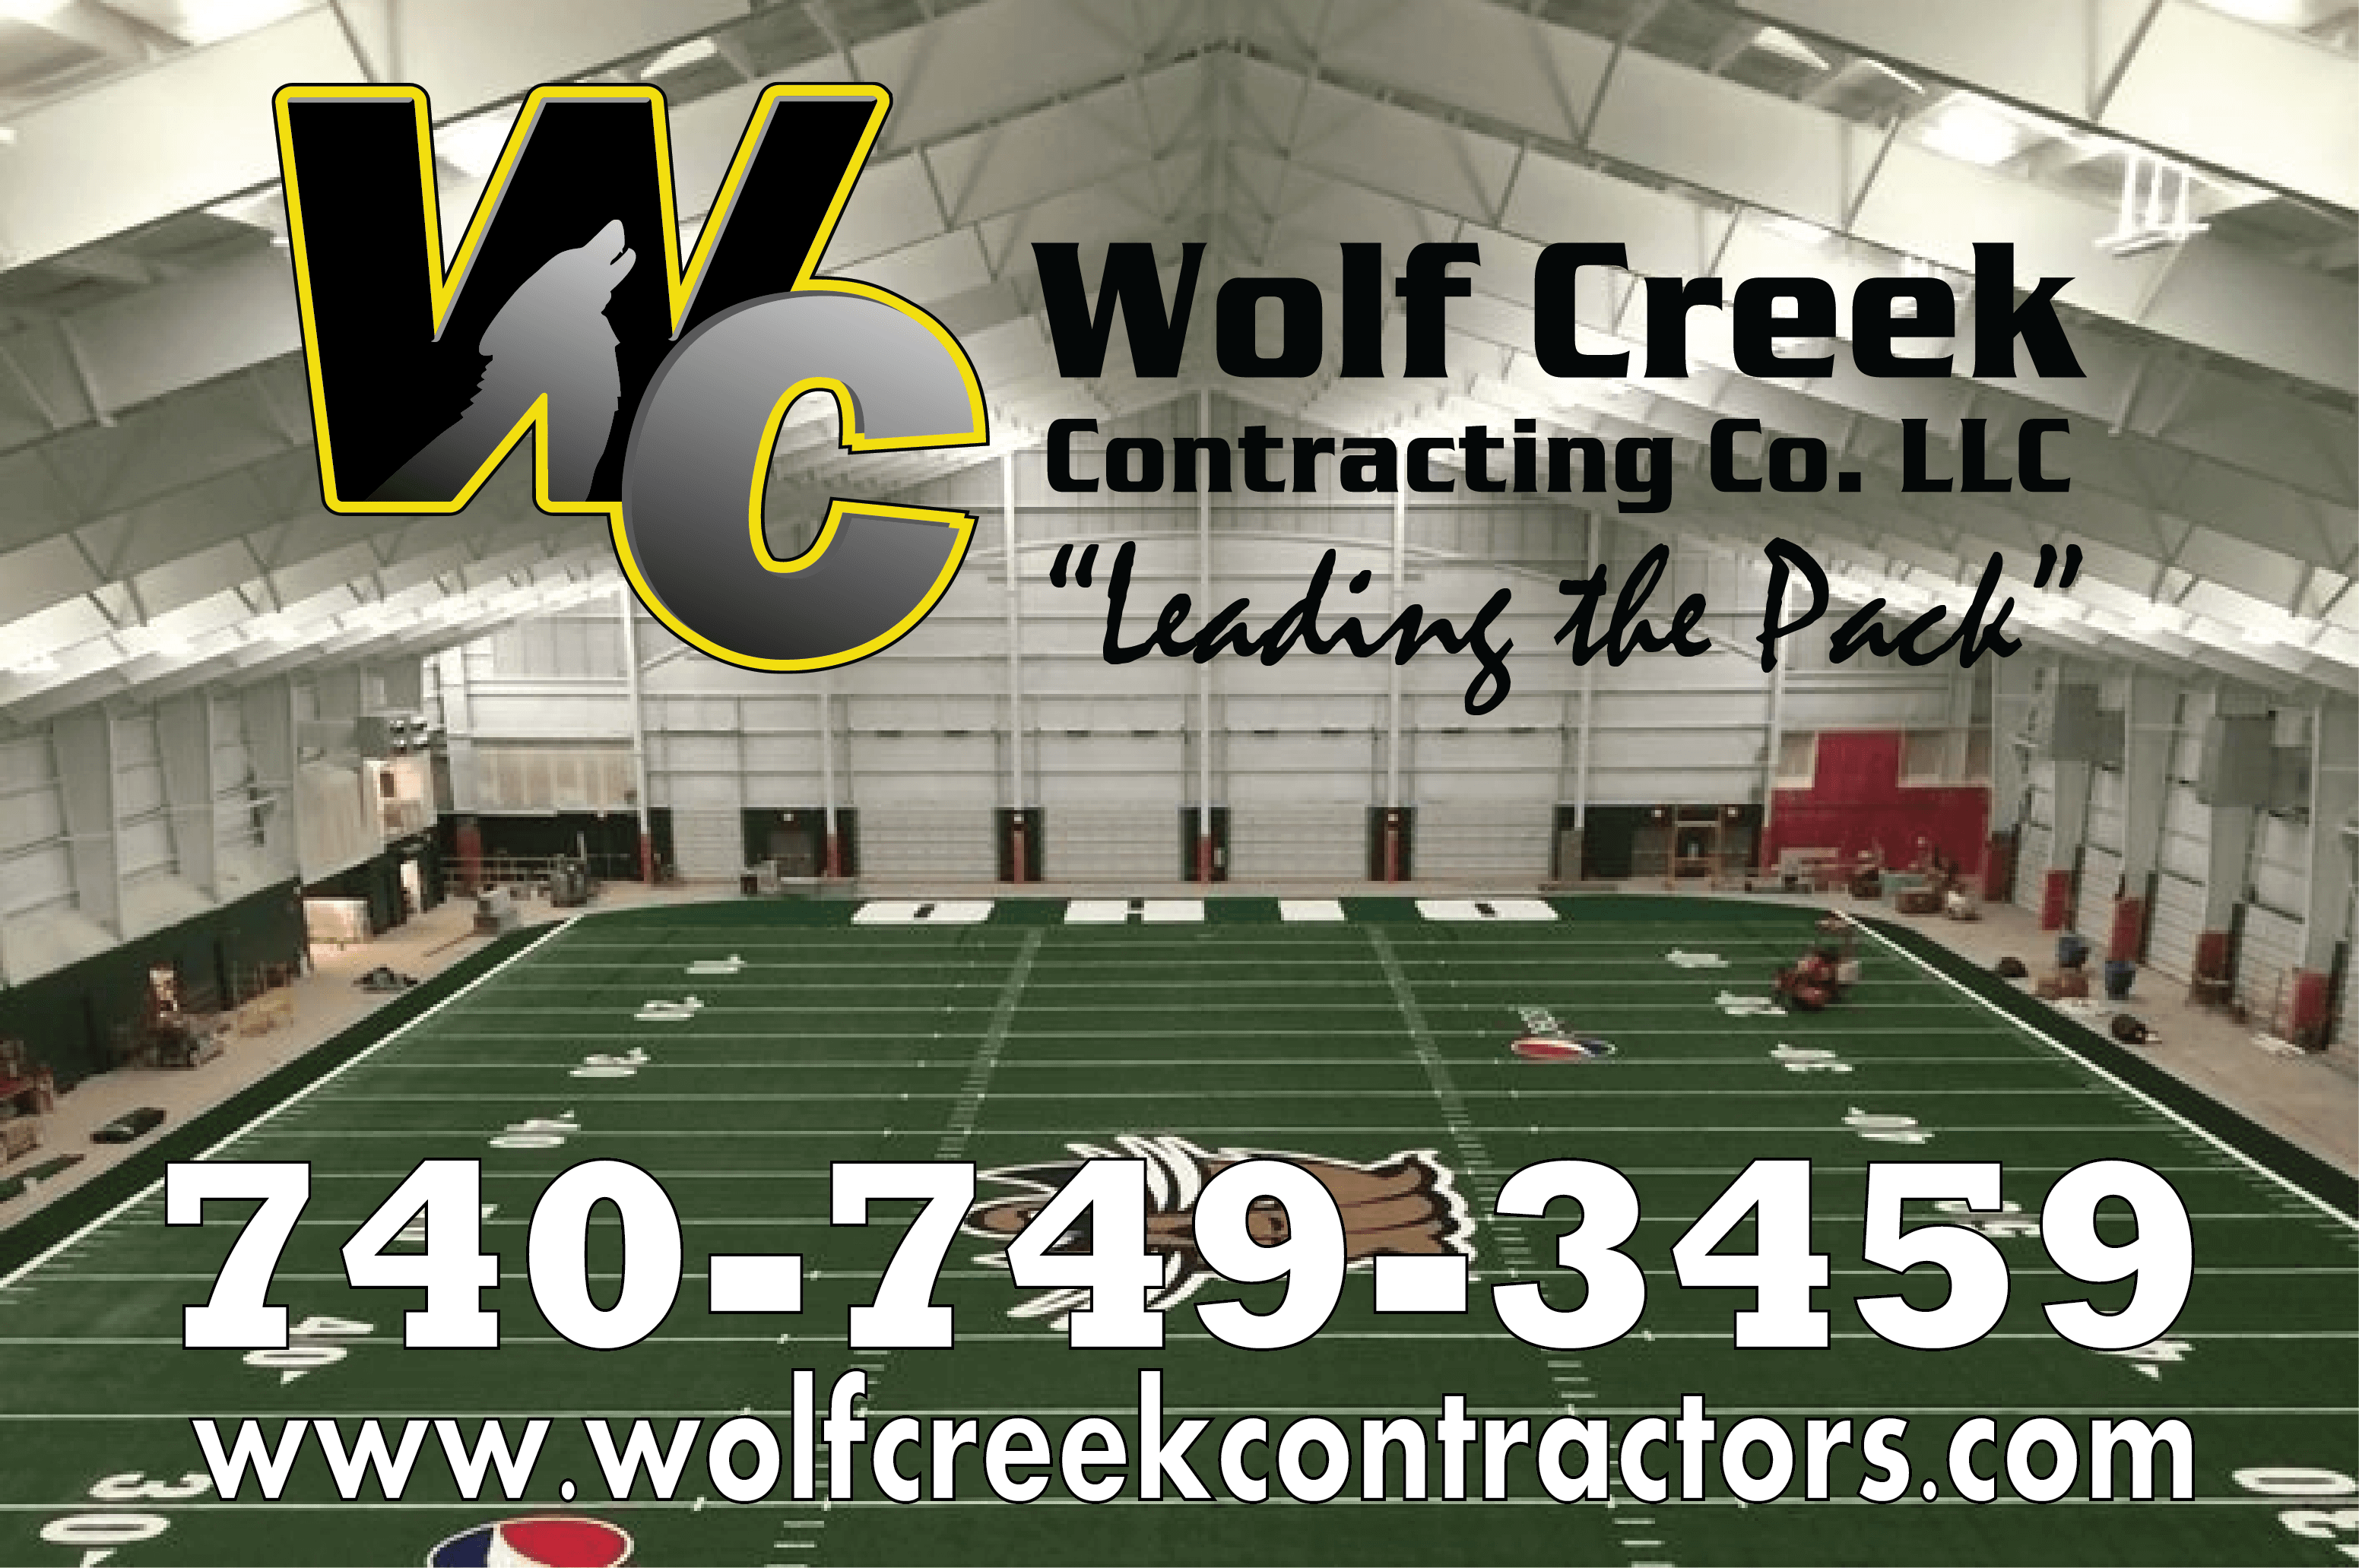 Wolf Creek Contracting logo over a football field